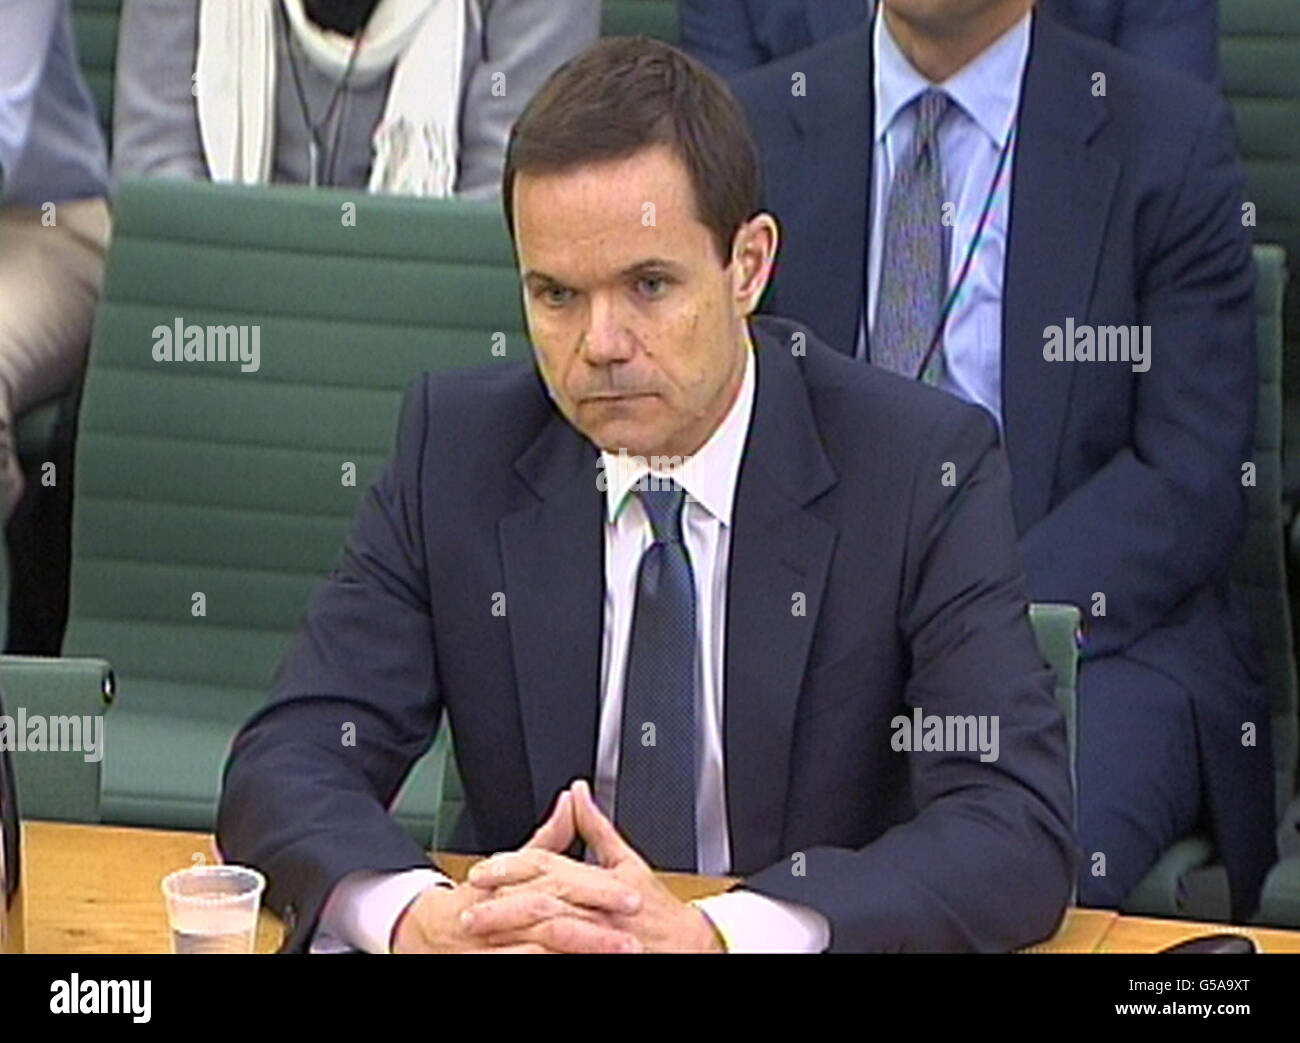 Jerry del Missier the former Chief Operating Officer, Barclays plc giving evidence to the Treasury Select Committee at the House of Commons, London. Stock Photo